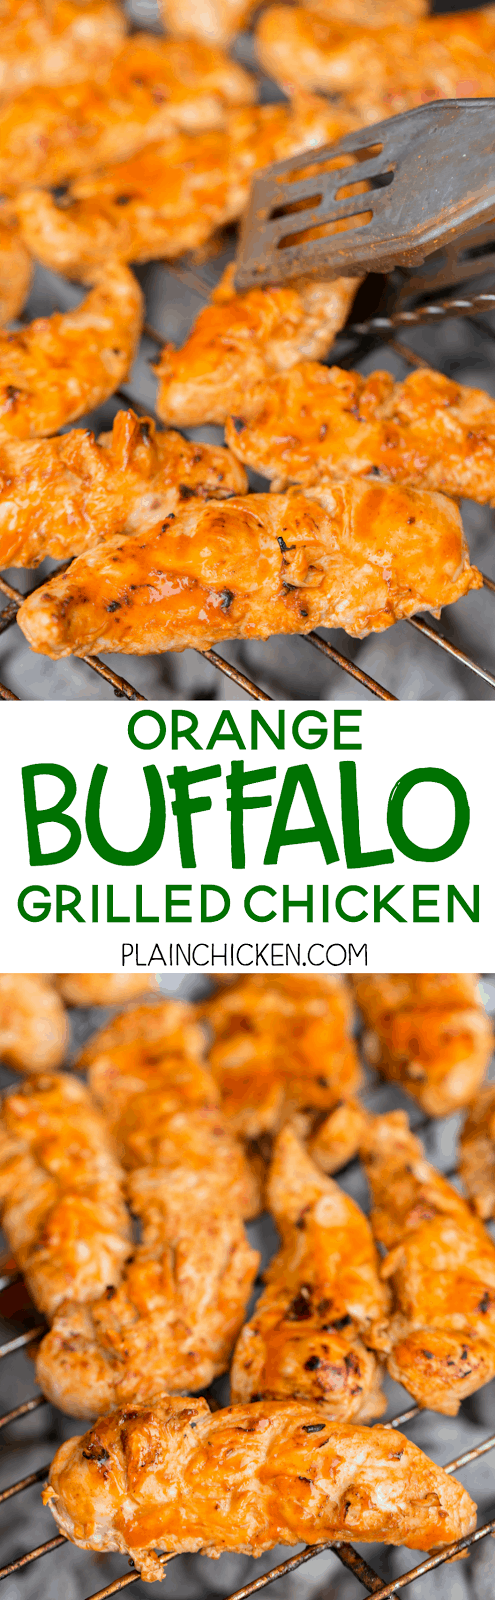 Orange Buffalo Grilled Chicken - chicken marinated in buffalo sauce and orange juice - grill, pan sear or bake for a quick weeknight meal. A little spicy, a little sweet and a whole lotta delicious! Ready to eat in 15 minutes!